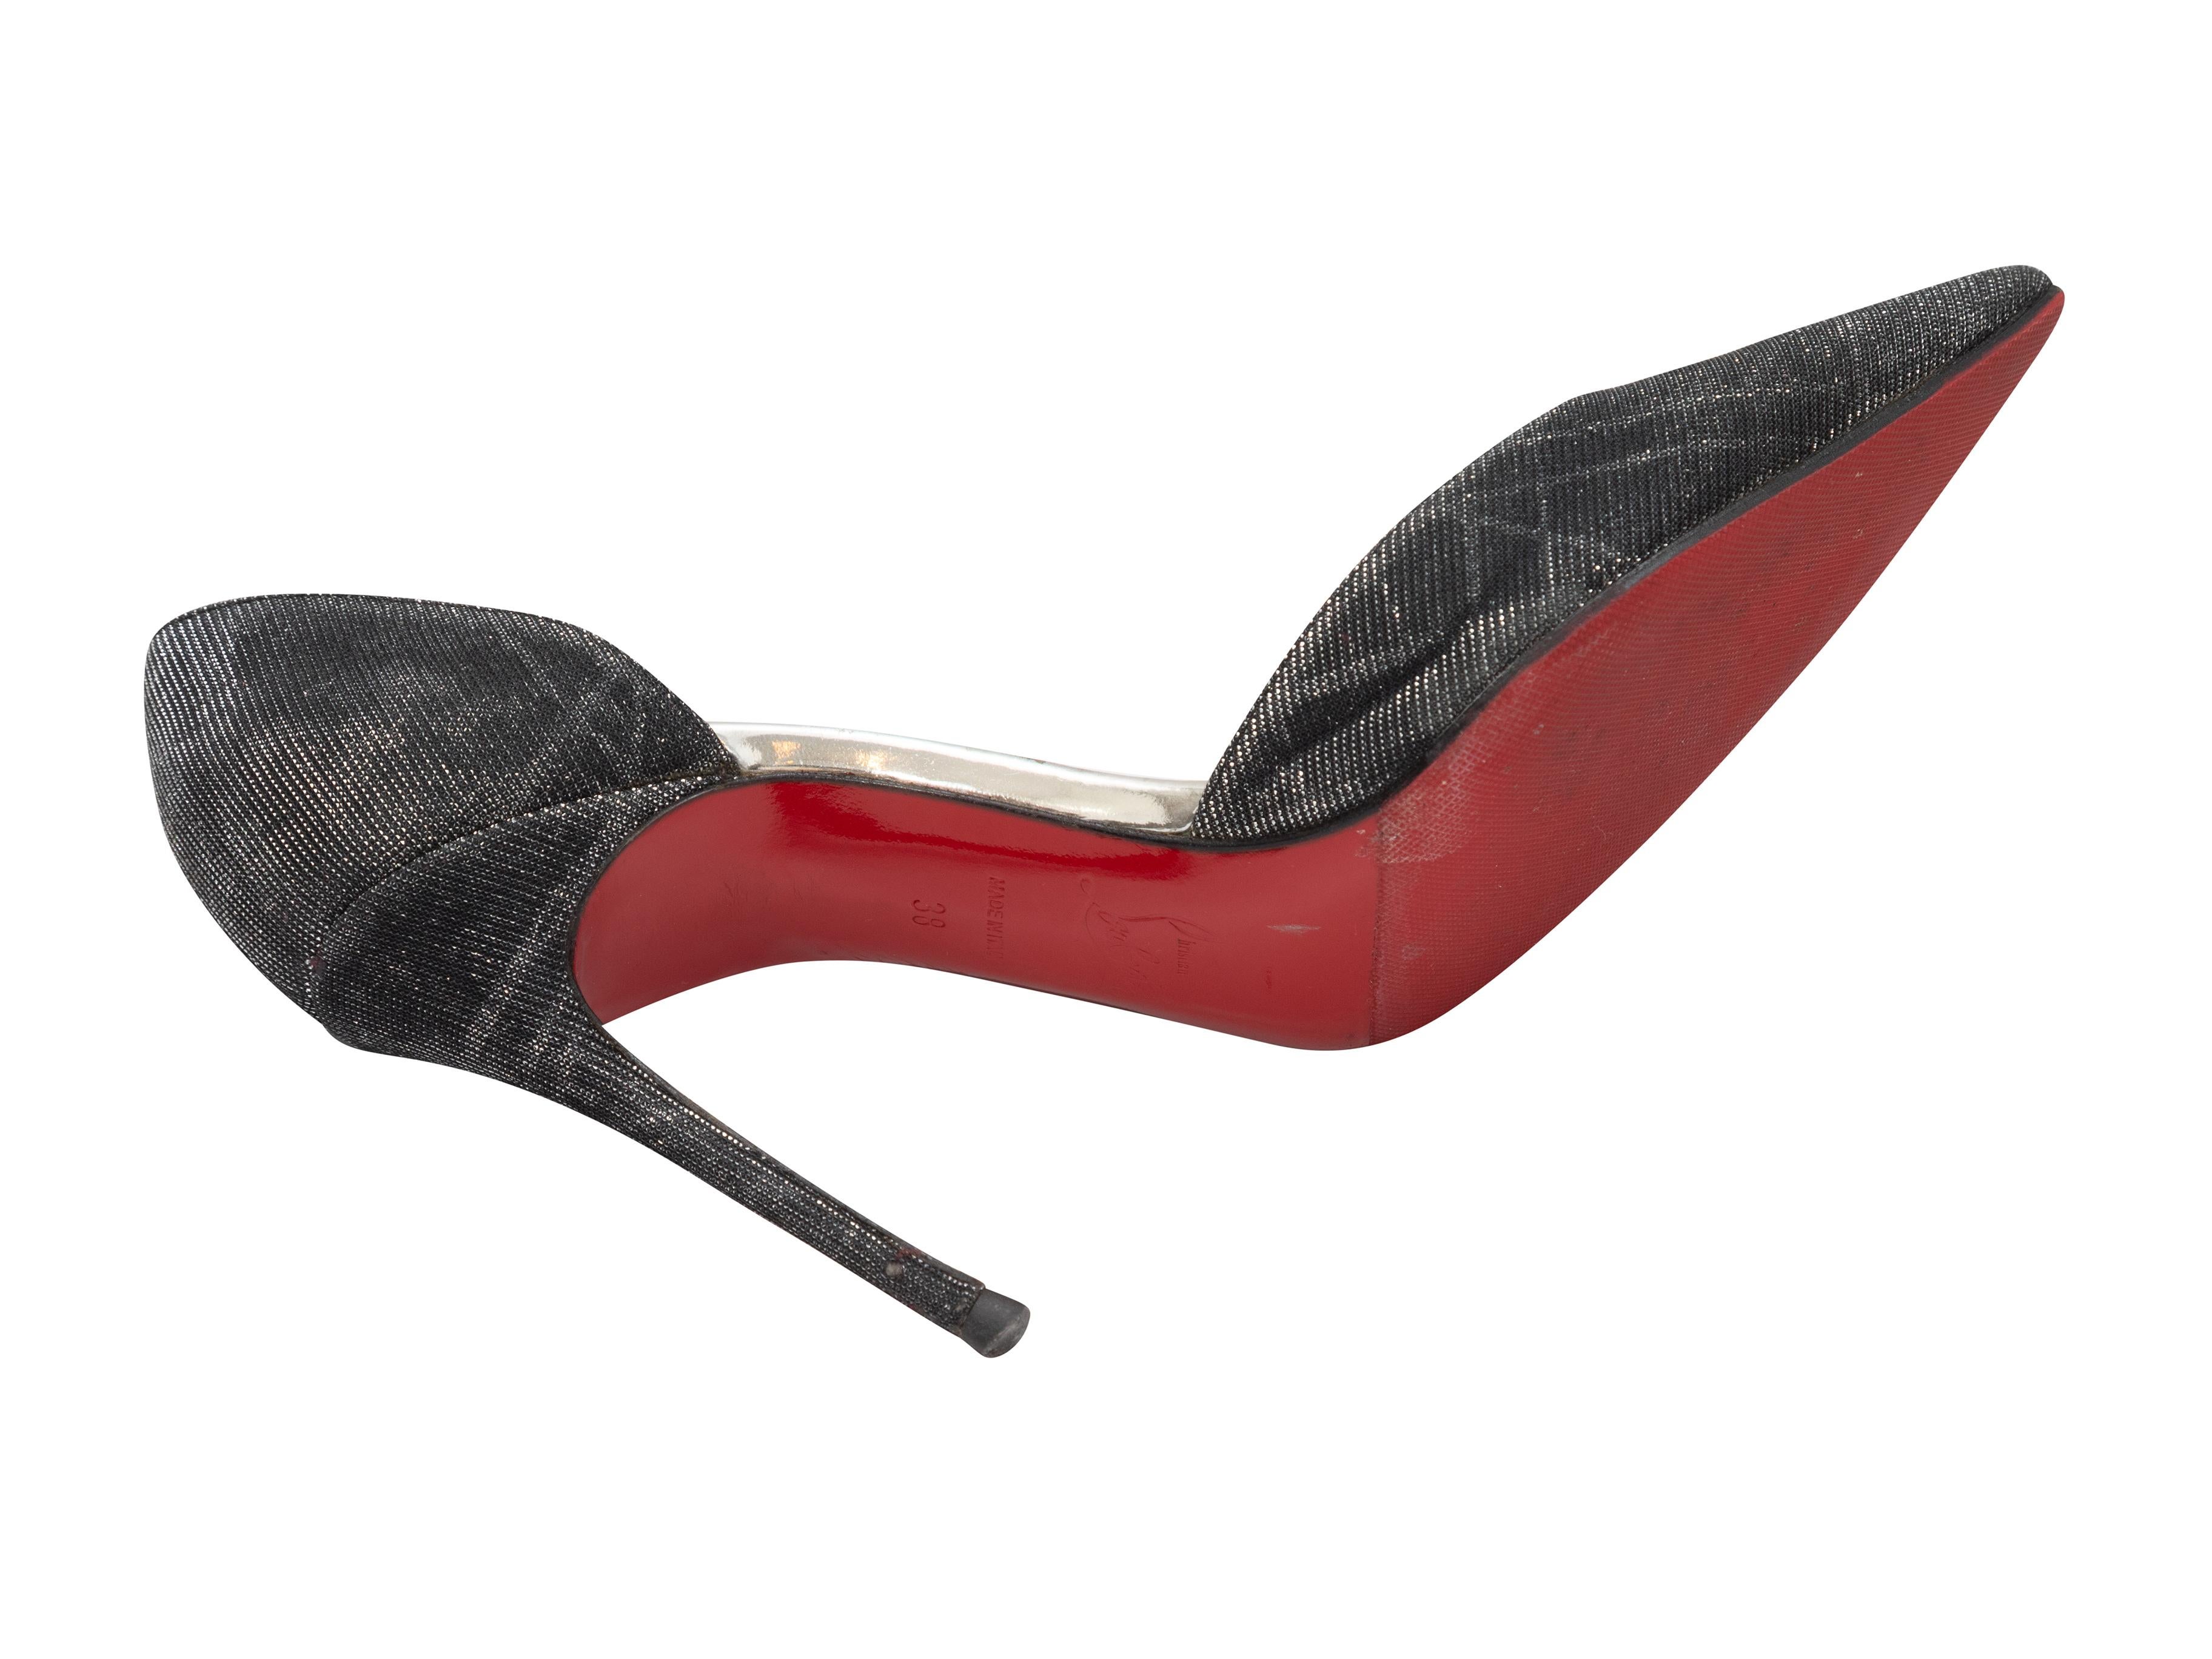 Black & Silver Christian Louboutin Pointed-Toe Pumps size 38 1